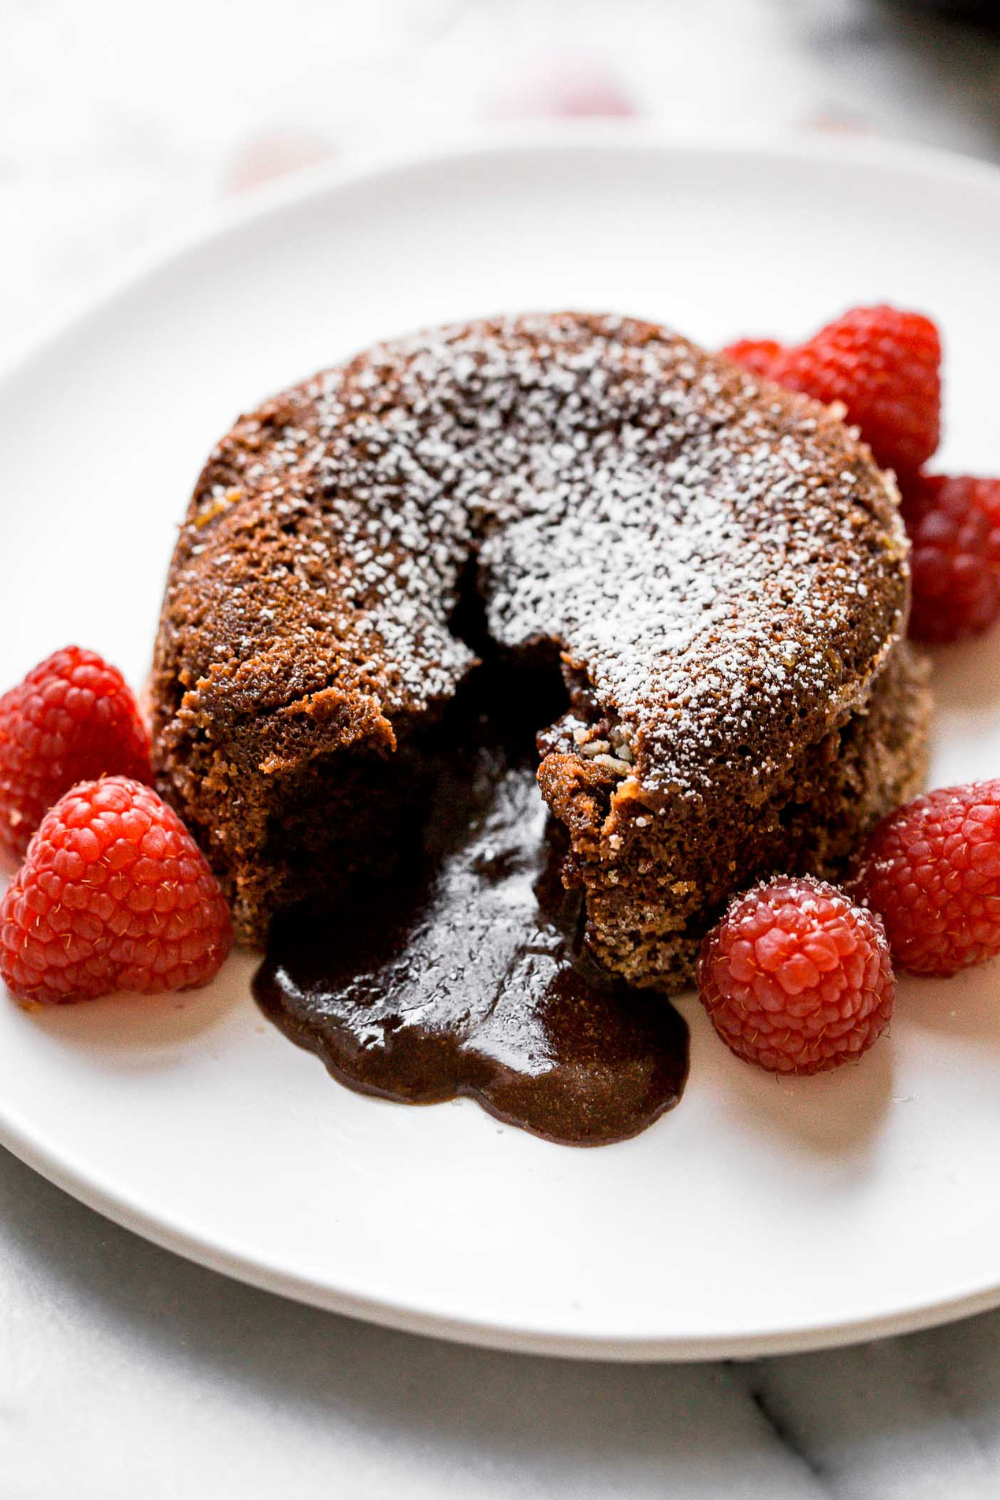 a chocolate lava cake on a white plate, surrounded by fresh raspberries, with a bite taken out so you can see the molten interior flowing out.